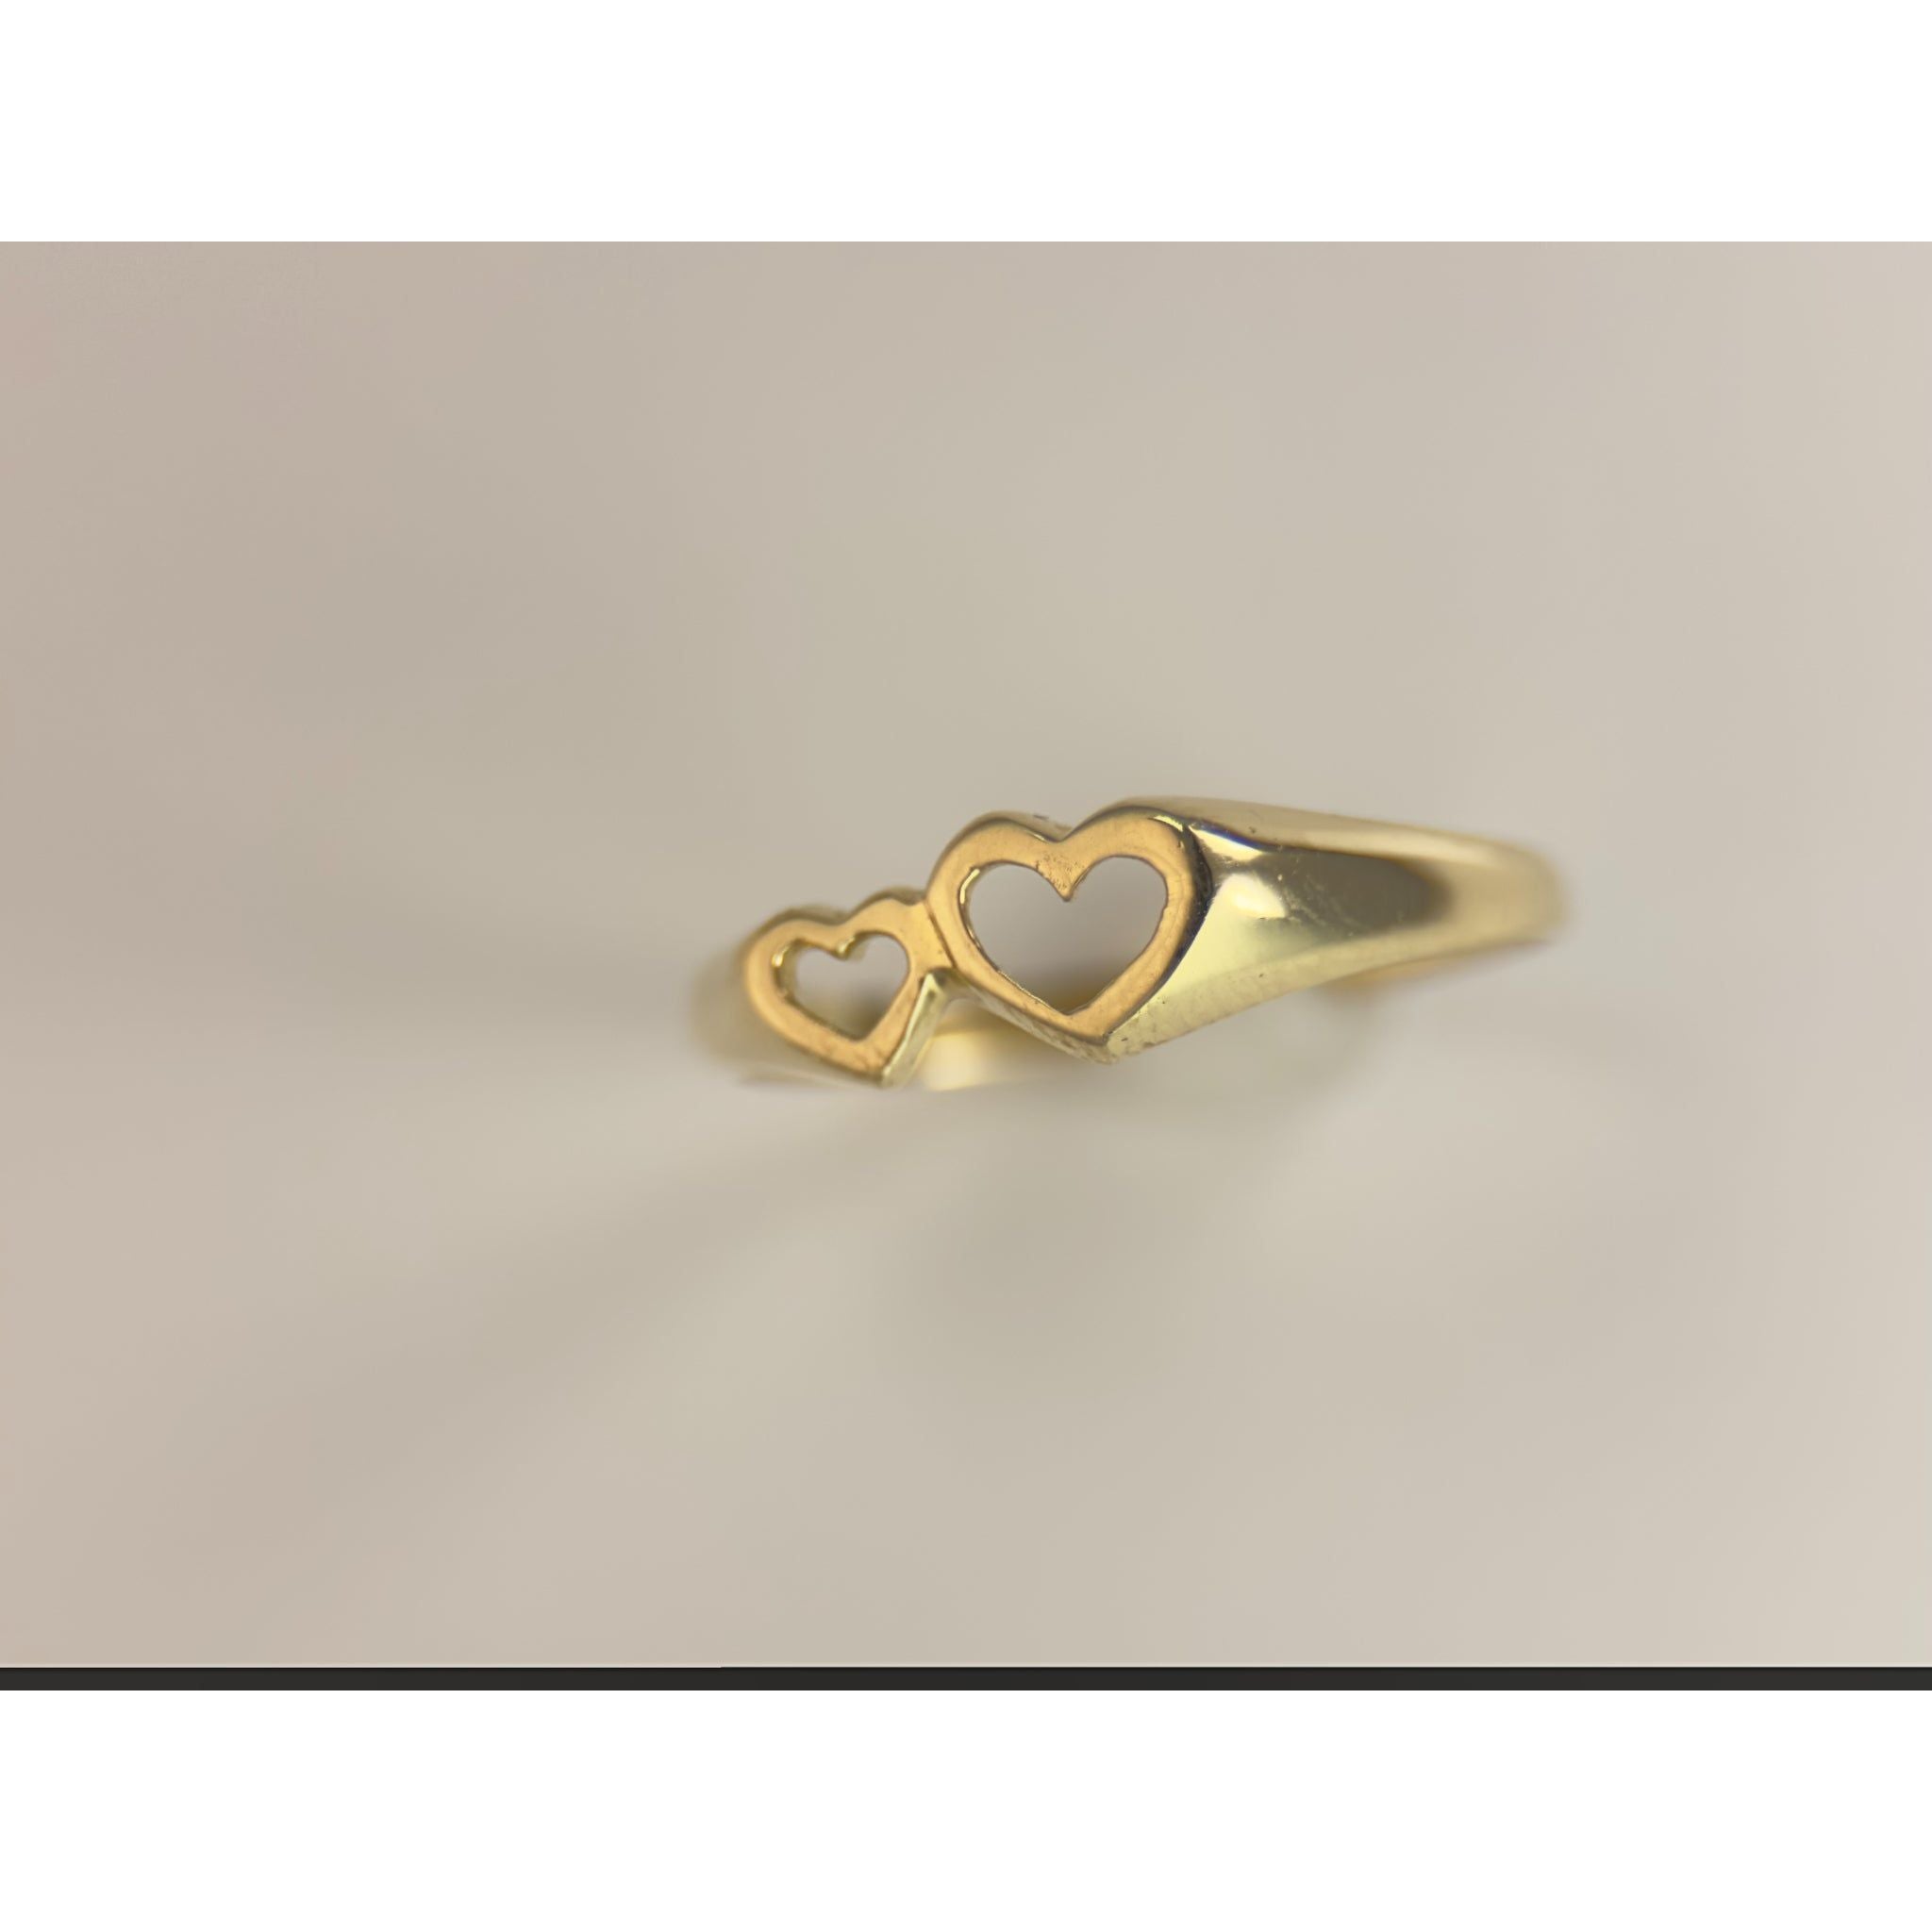 DR2000 - 14K Yellow Gold - Ladies Gold Rings - 2 hearts